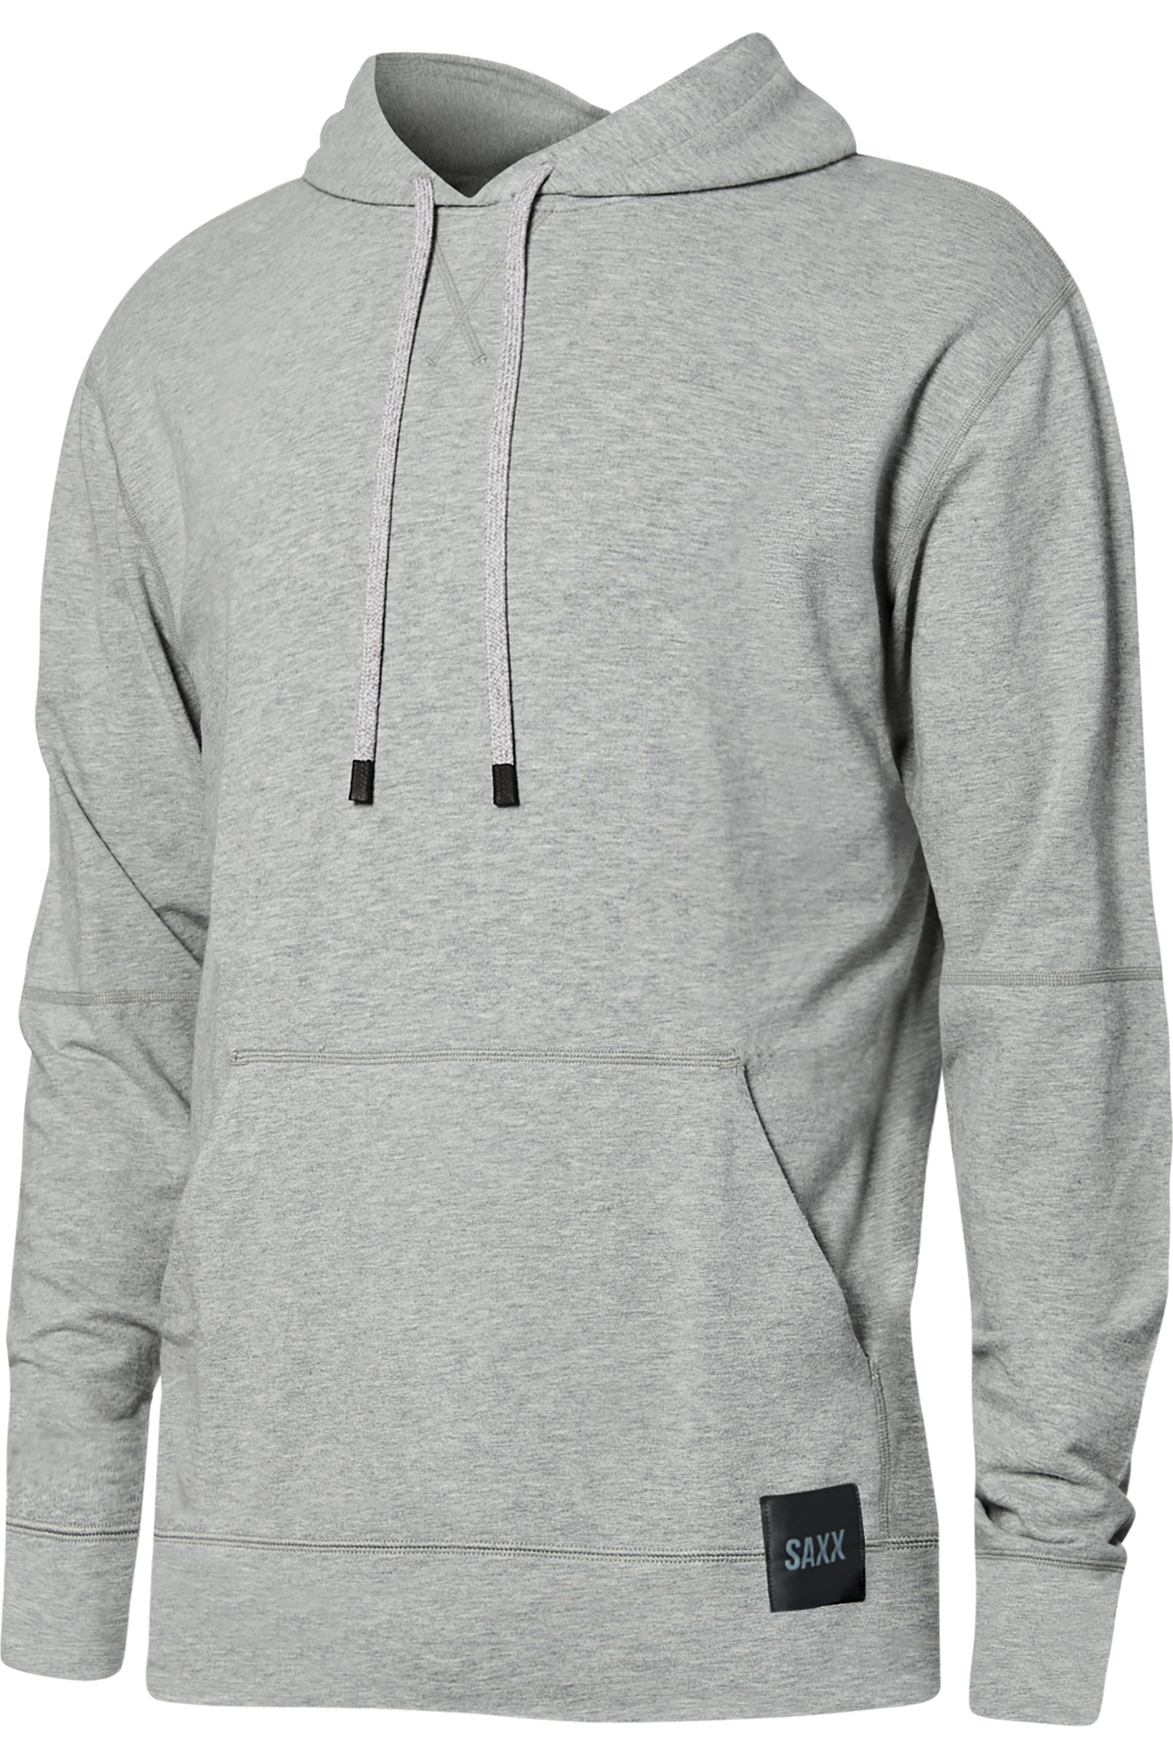 Saxx 3Six Five Hoodie - Style SXLH37 AGH, front